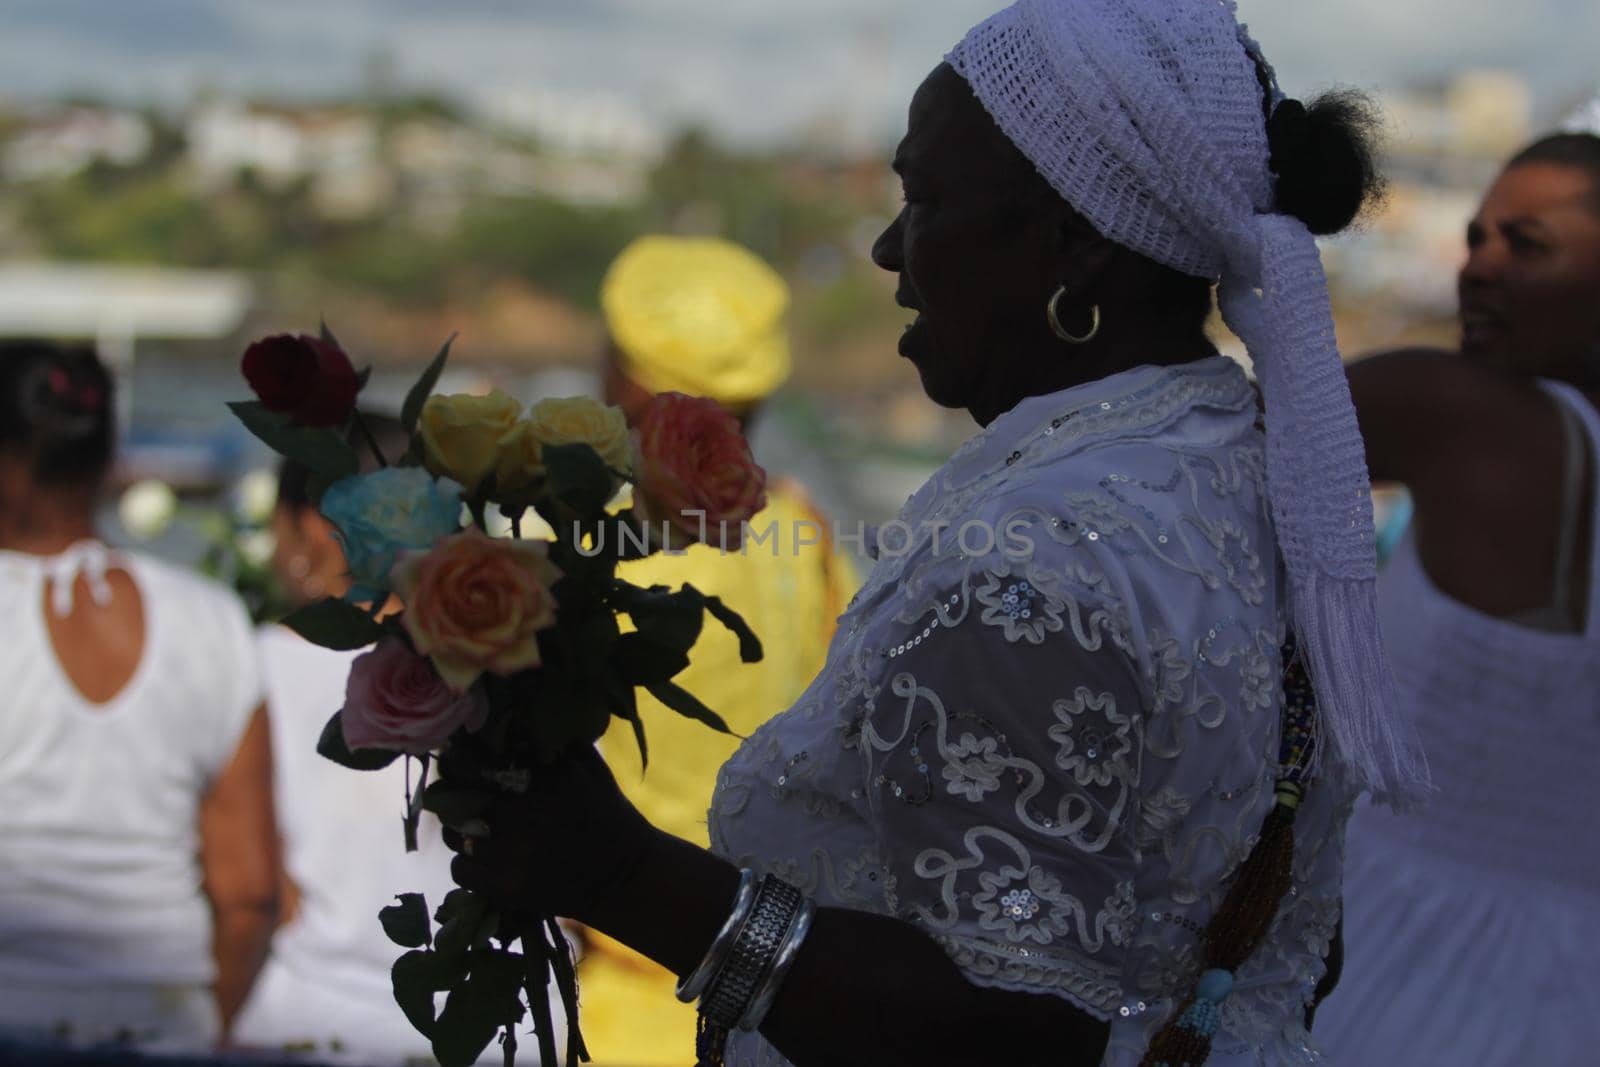 salvador, bahia, brazil - february 2, 2015: Candomble devotees and supporters of the African matriaz religion pay tribute to the orixa Yemanja in the city of Salvador.